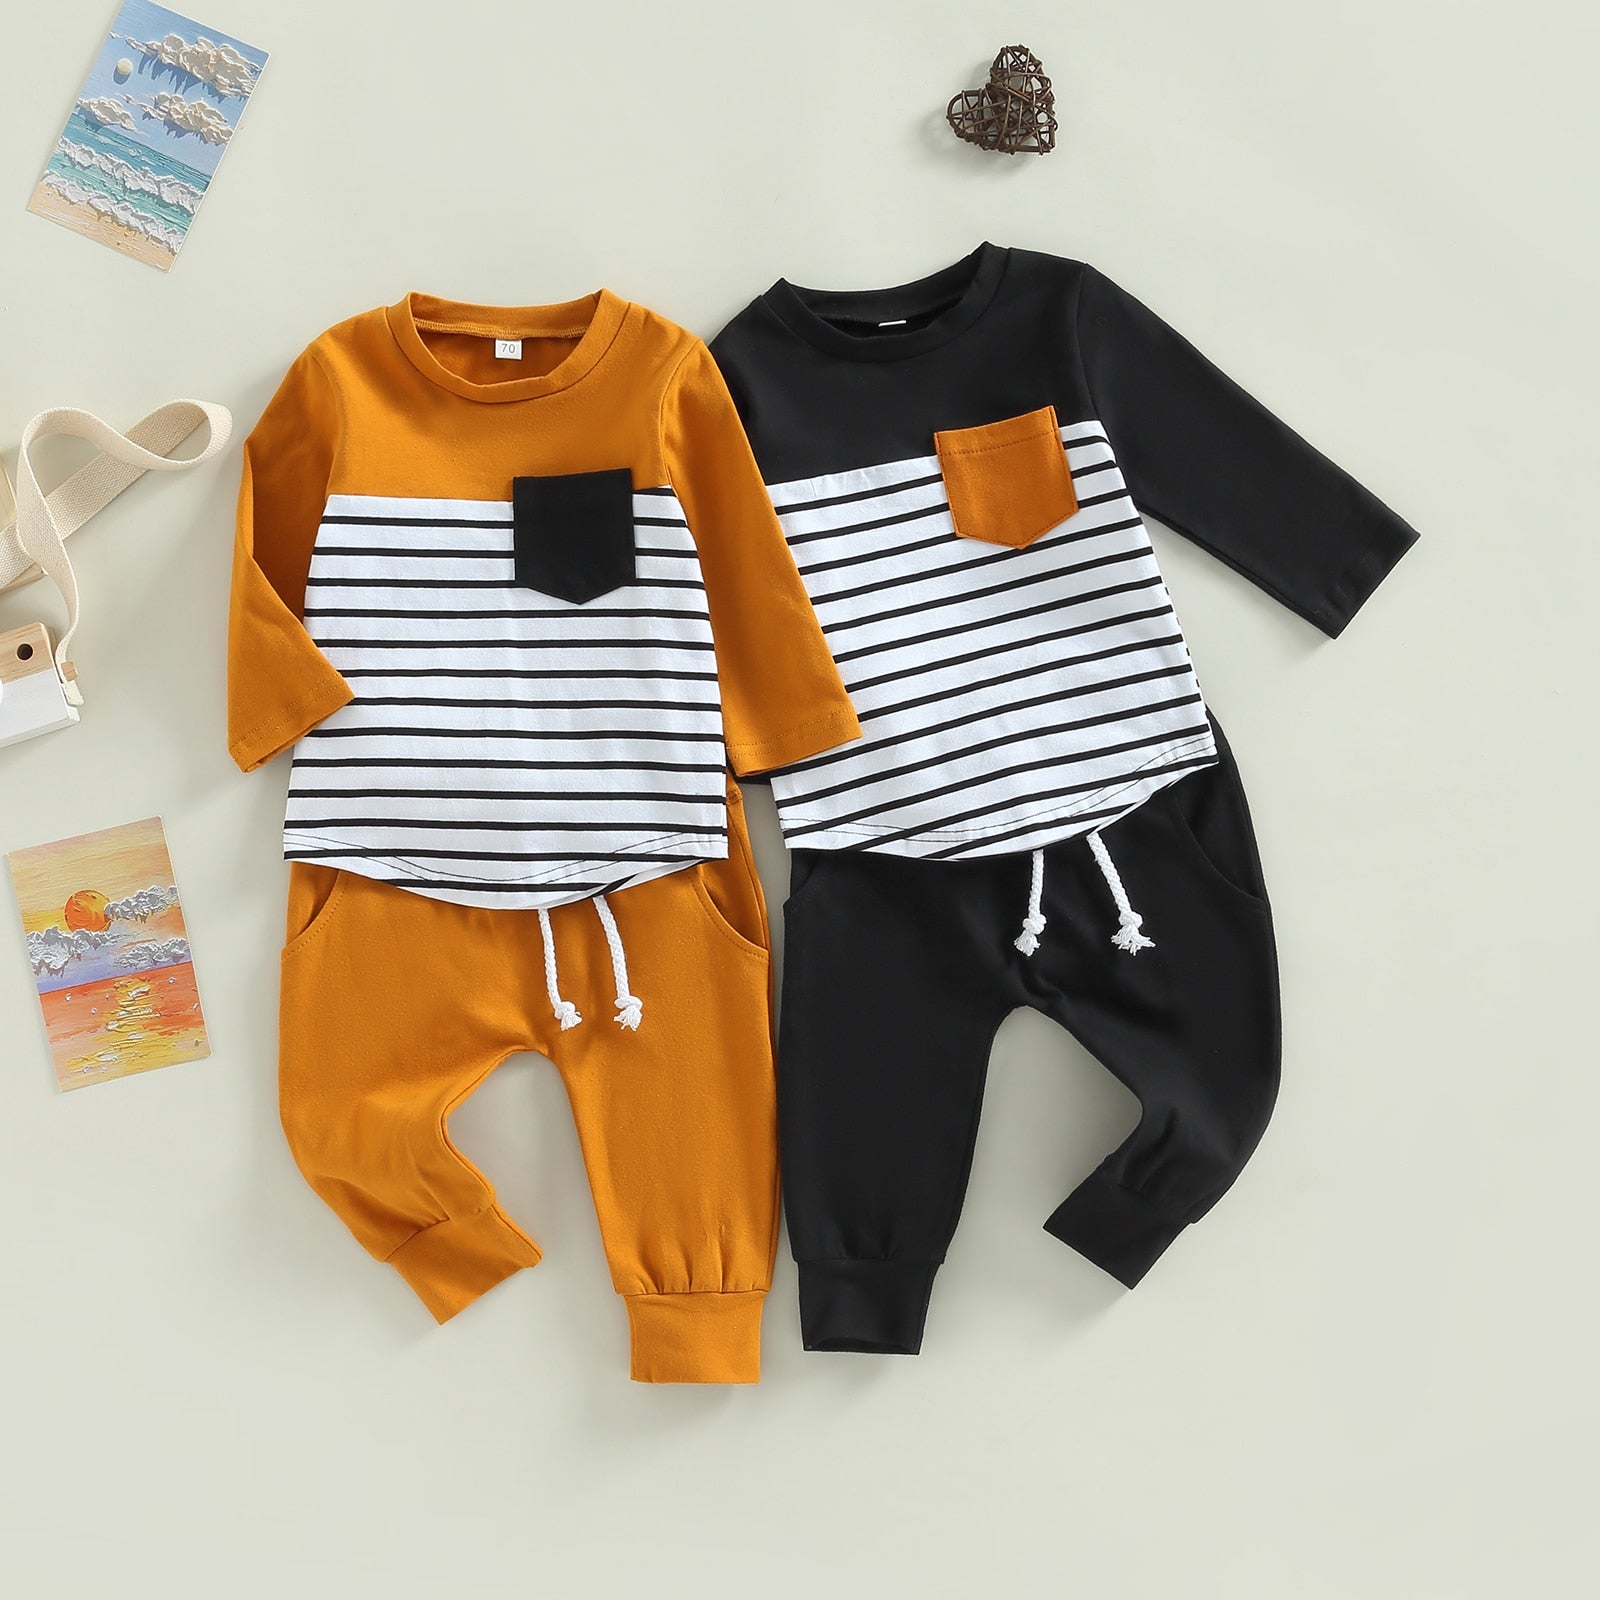 Striped Matching Stretchy Baby Outfit Set